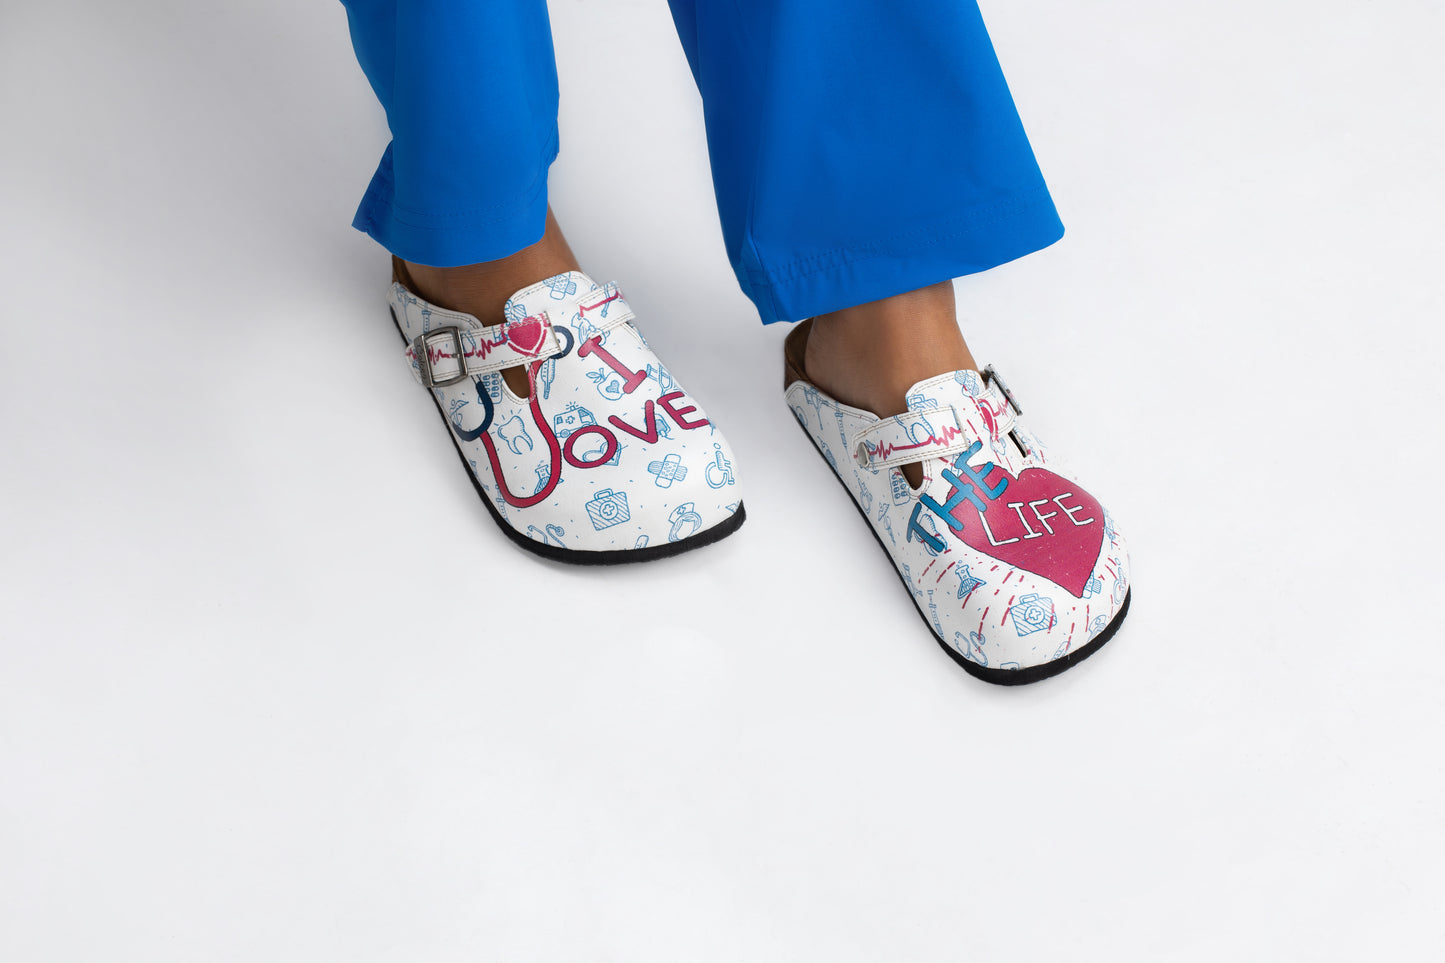 I Love the Life Patterned Clogs